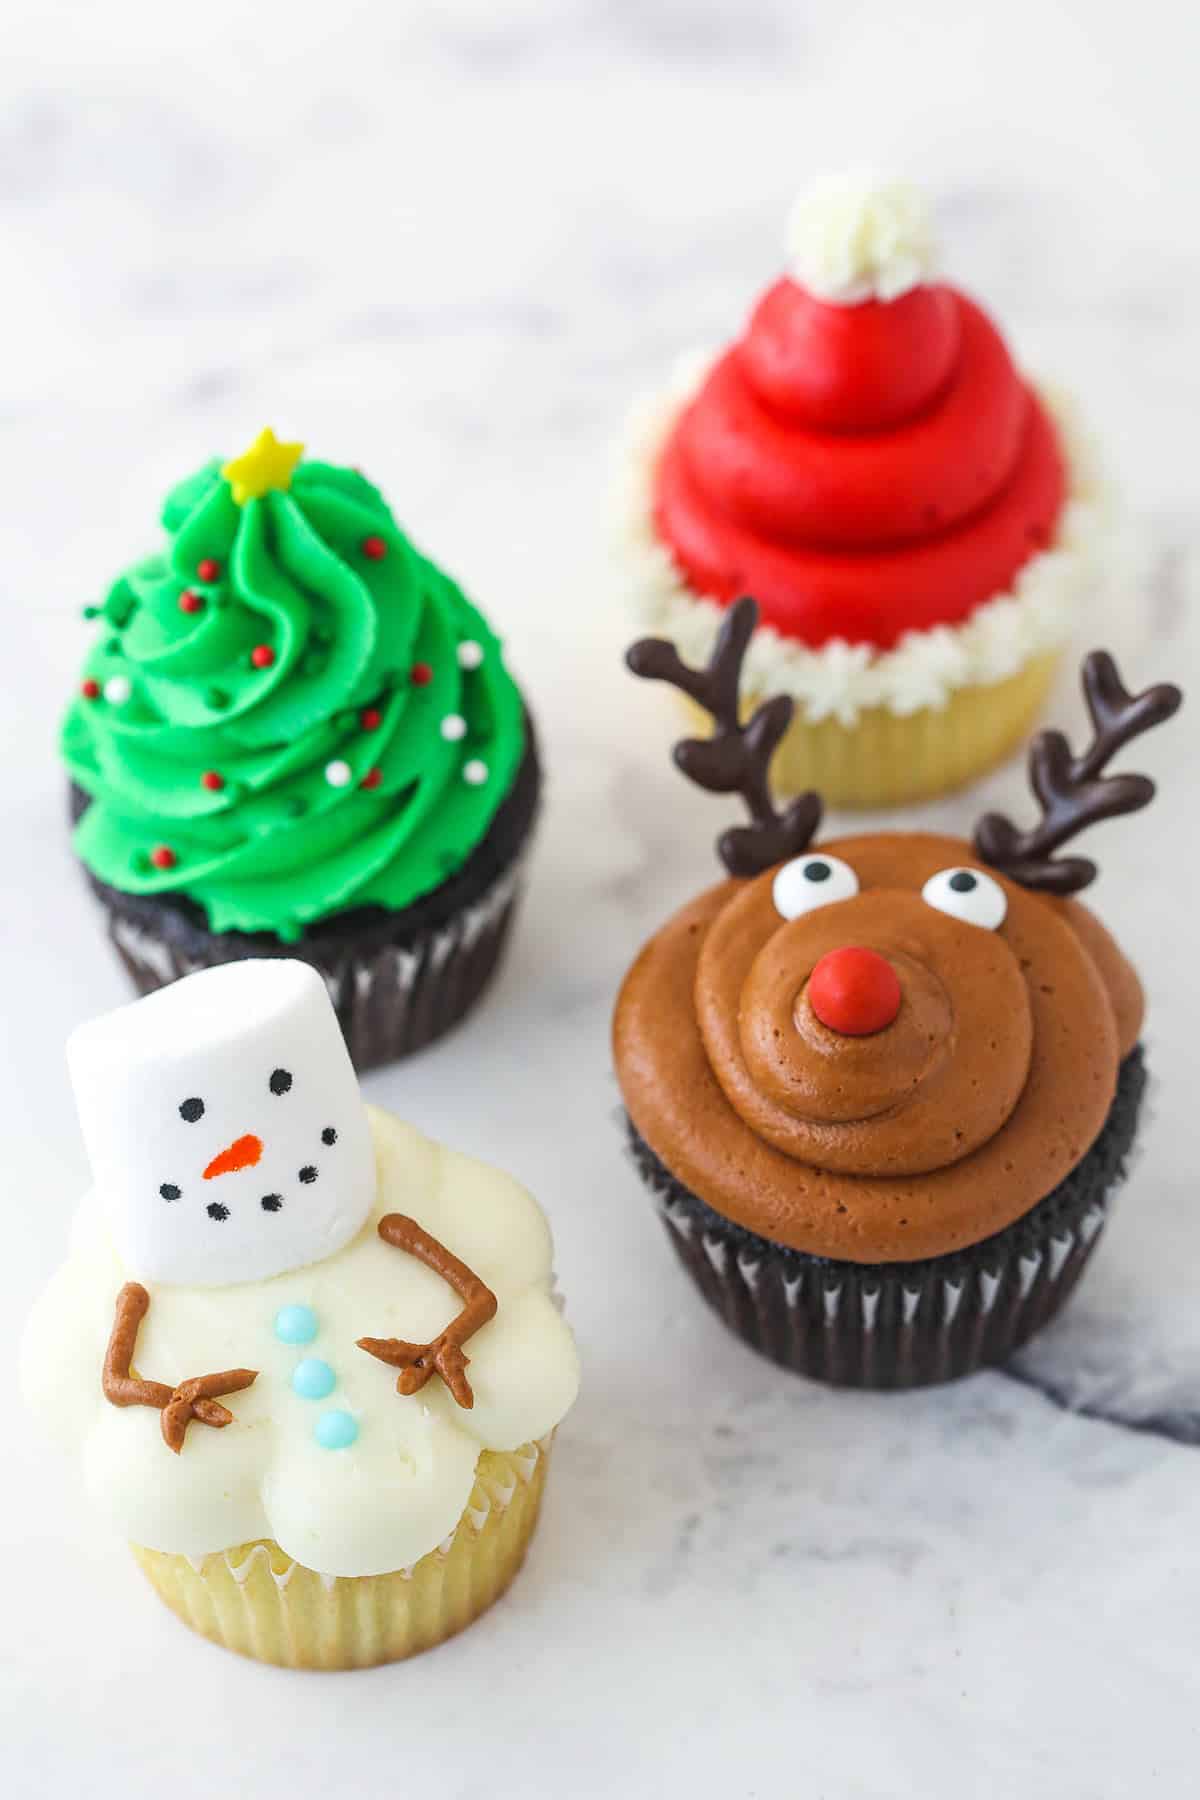 one of each of the 4 christmas cupcakes designs on a marble background